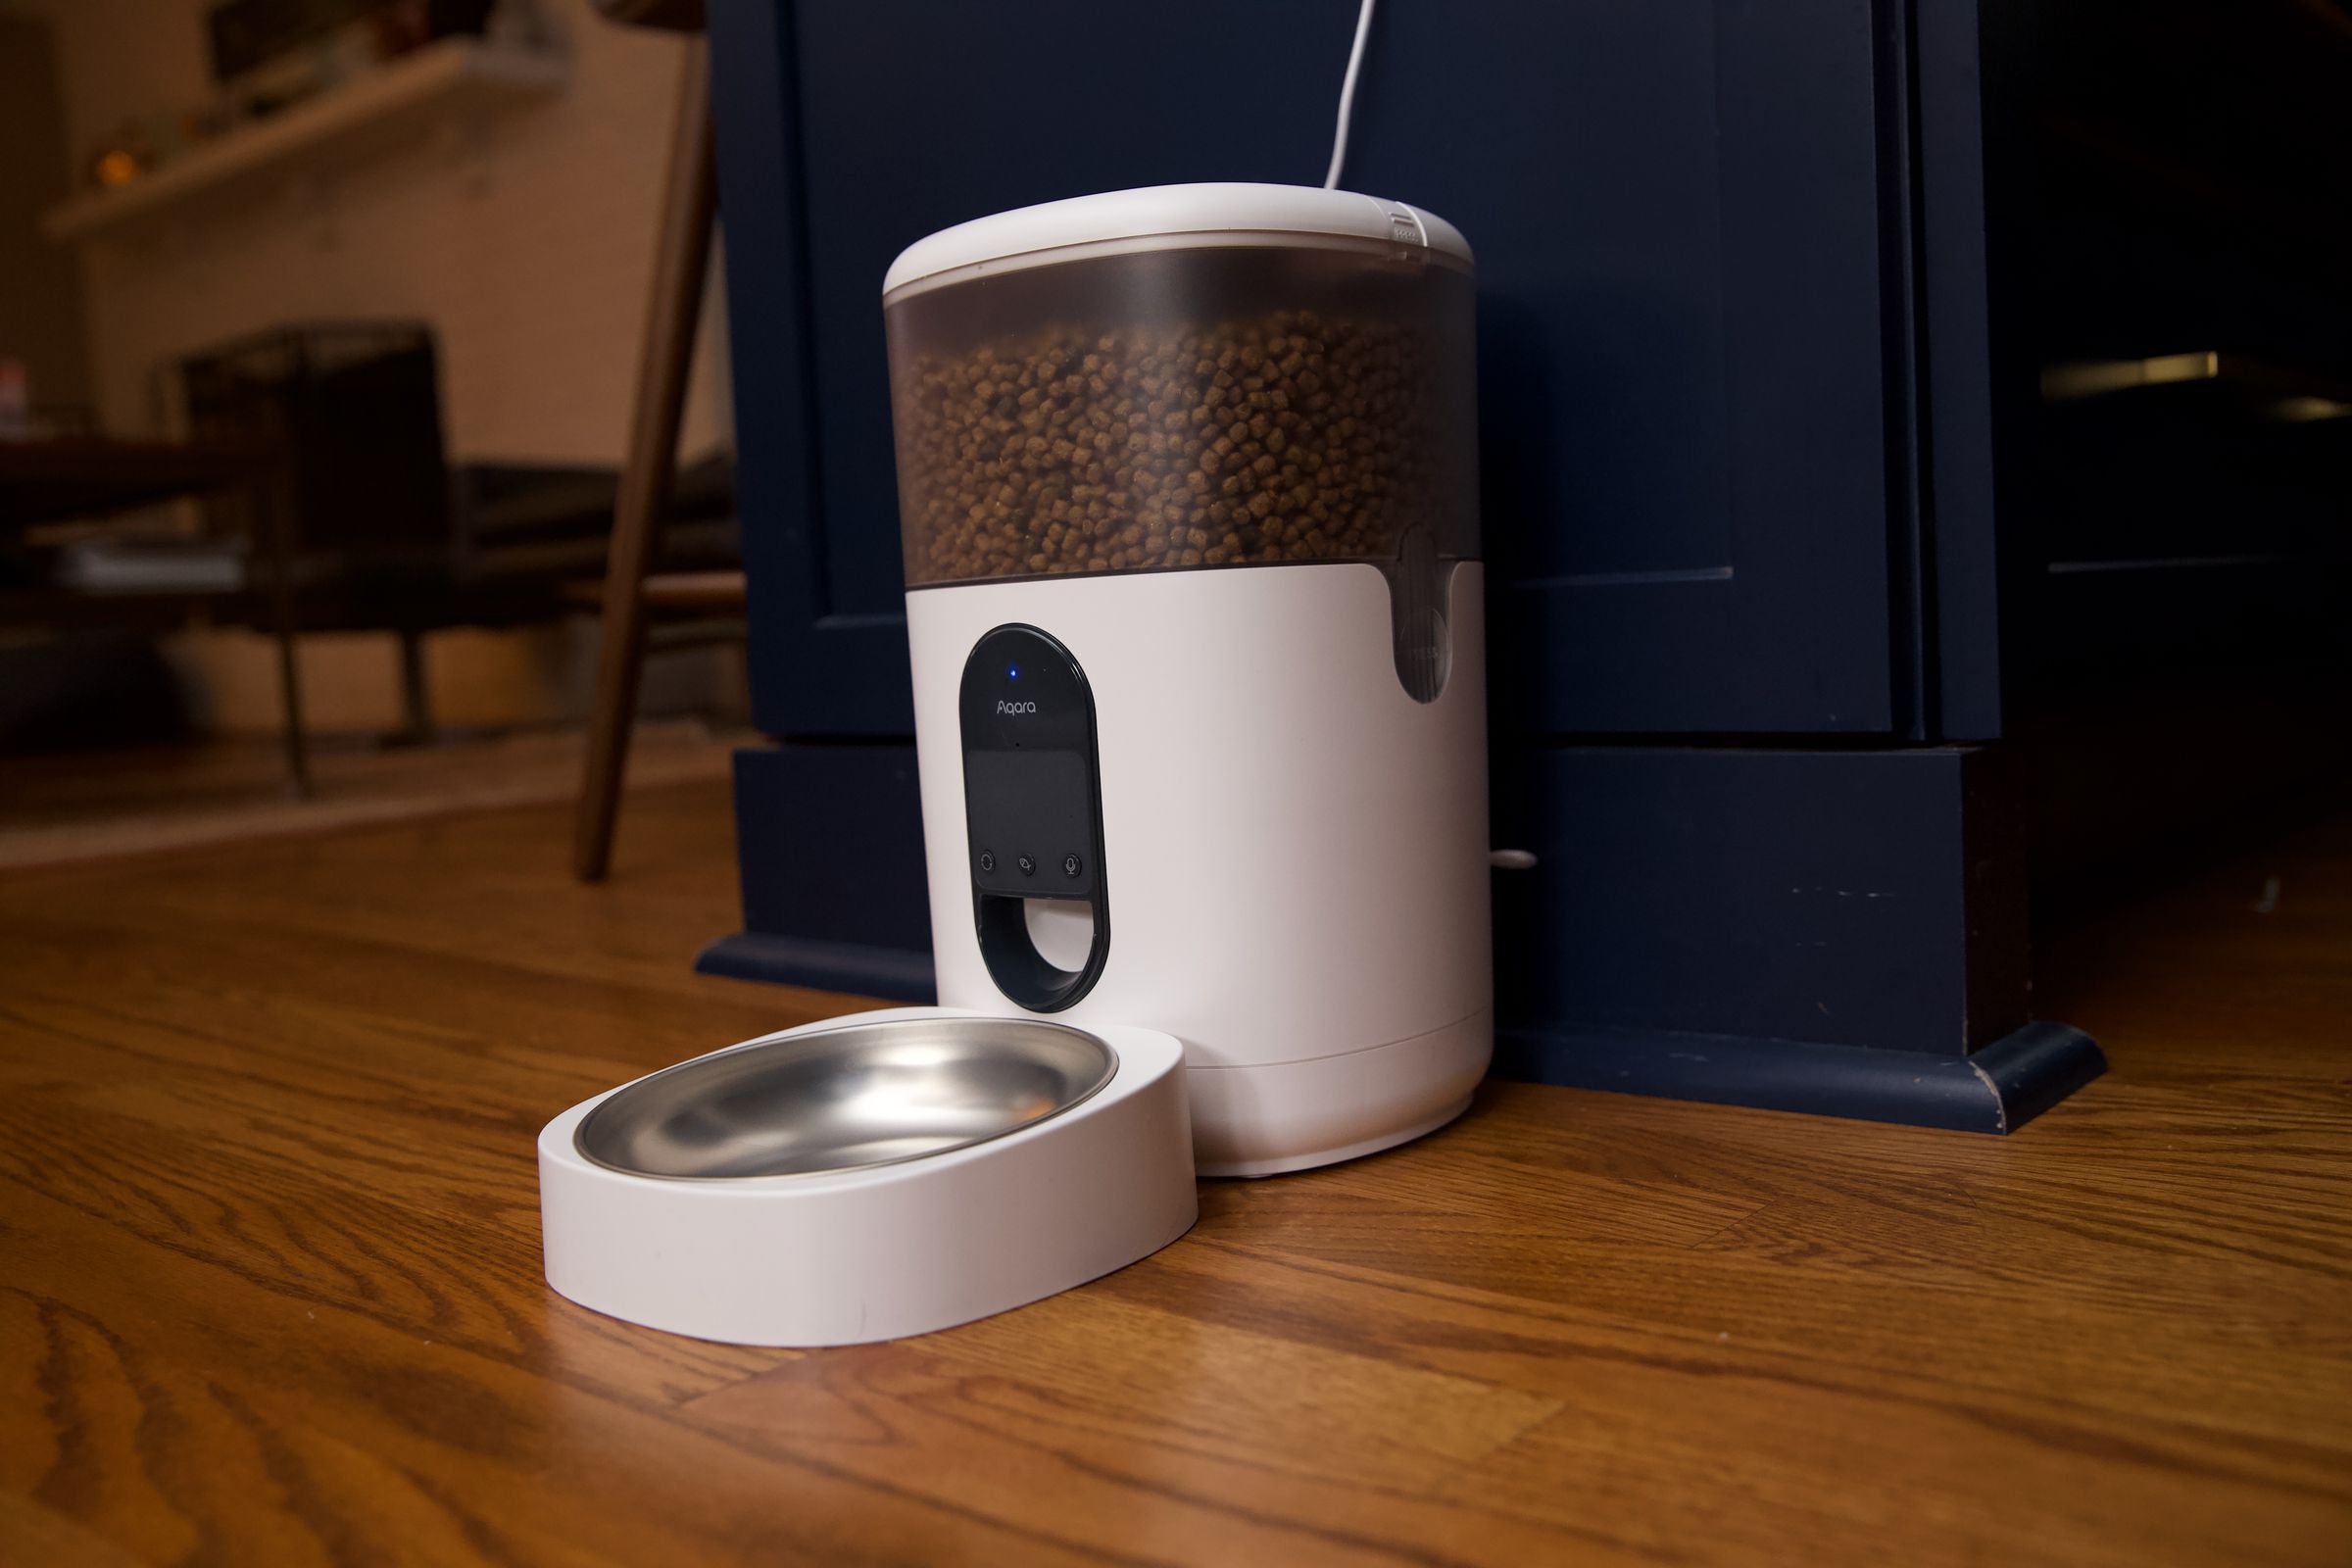 The Aqara pet feeder is designed for small to medium-sized pets and holds around 3.7 pounds of food.